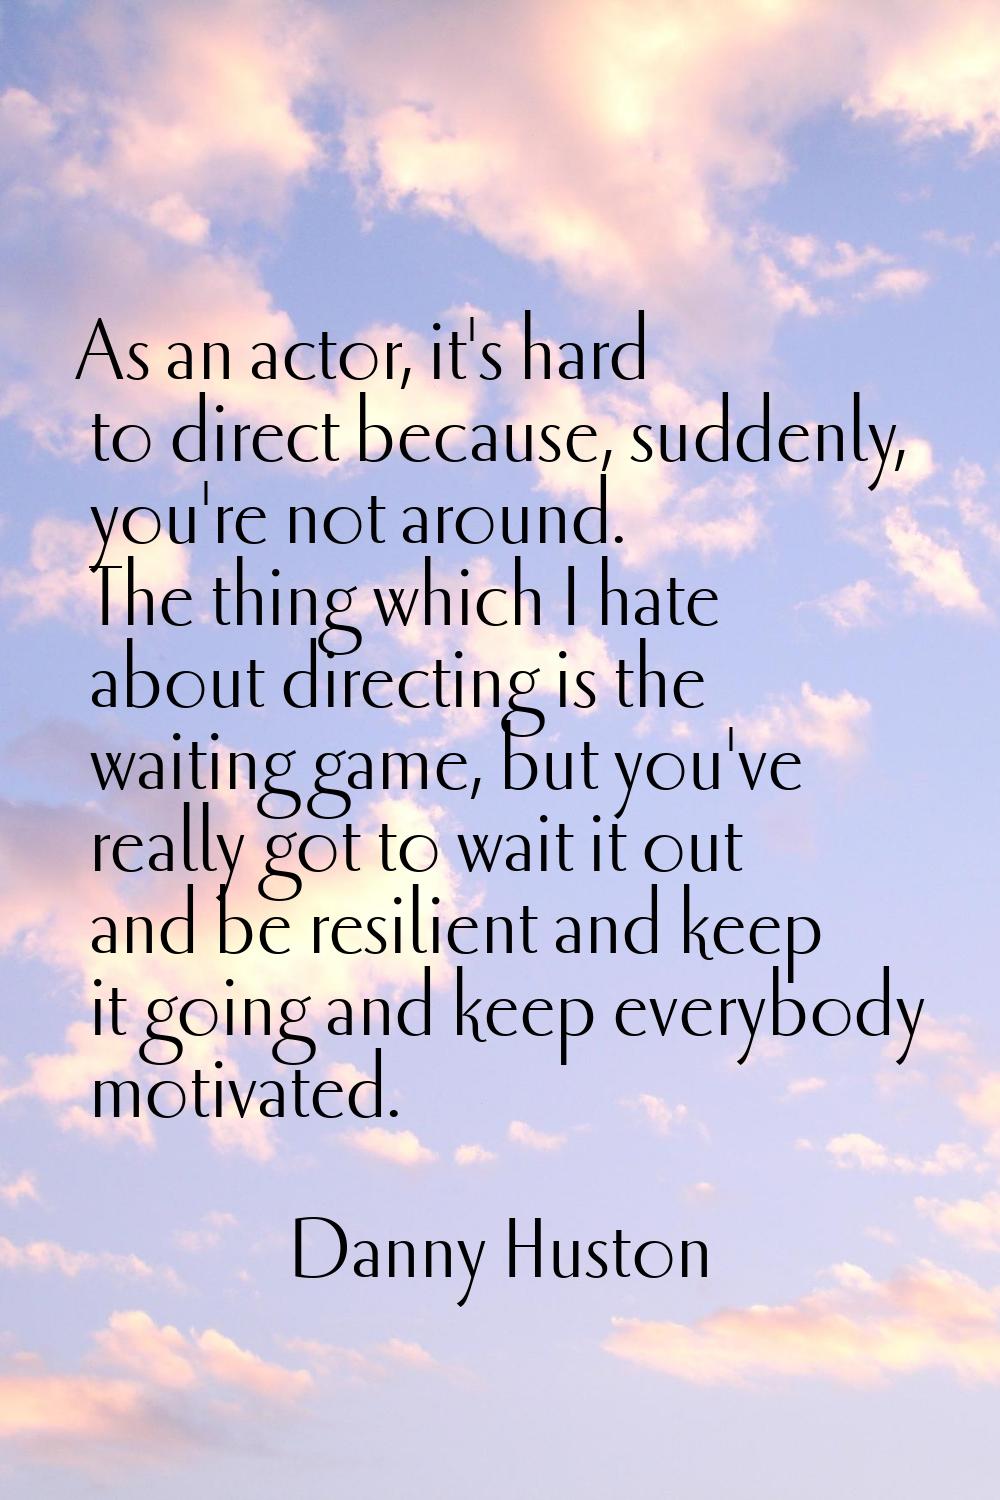 As an actor, it's hard to direct because, suddenly, you're not around. The thing which I hate about